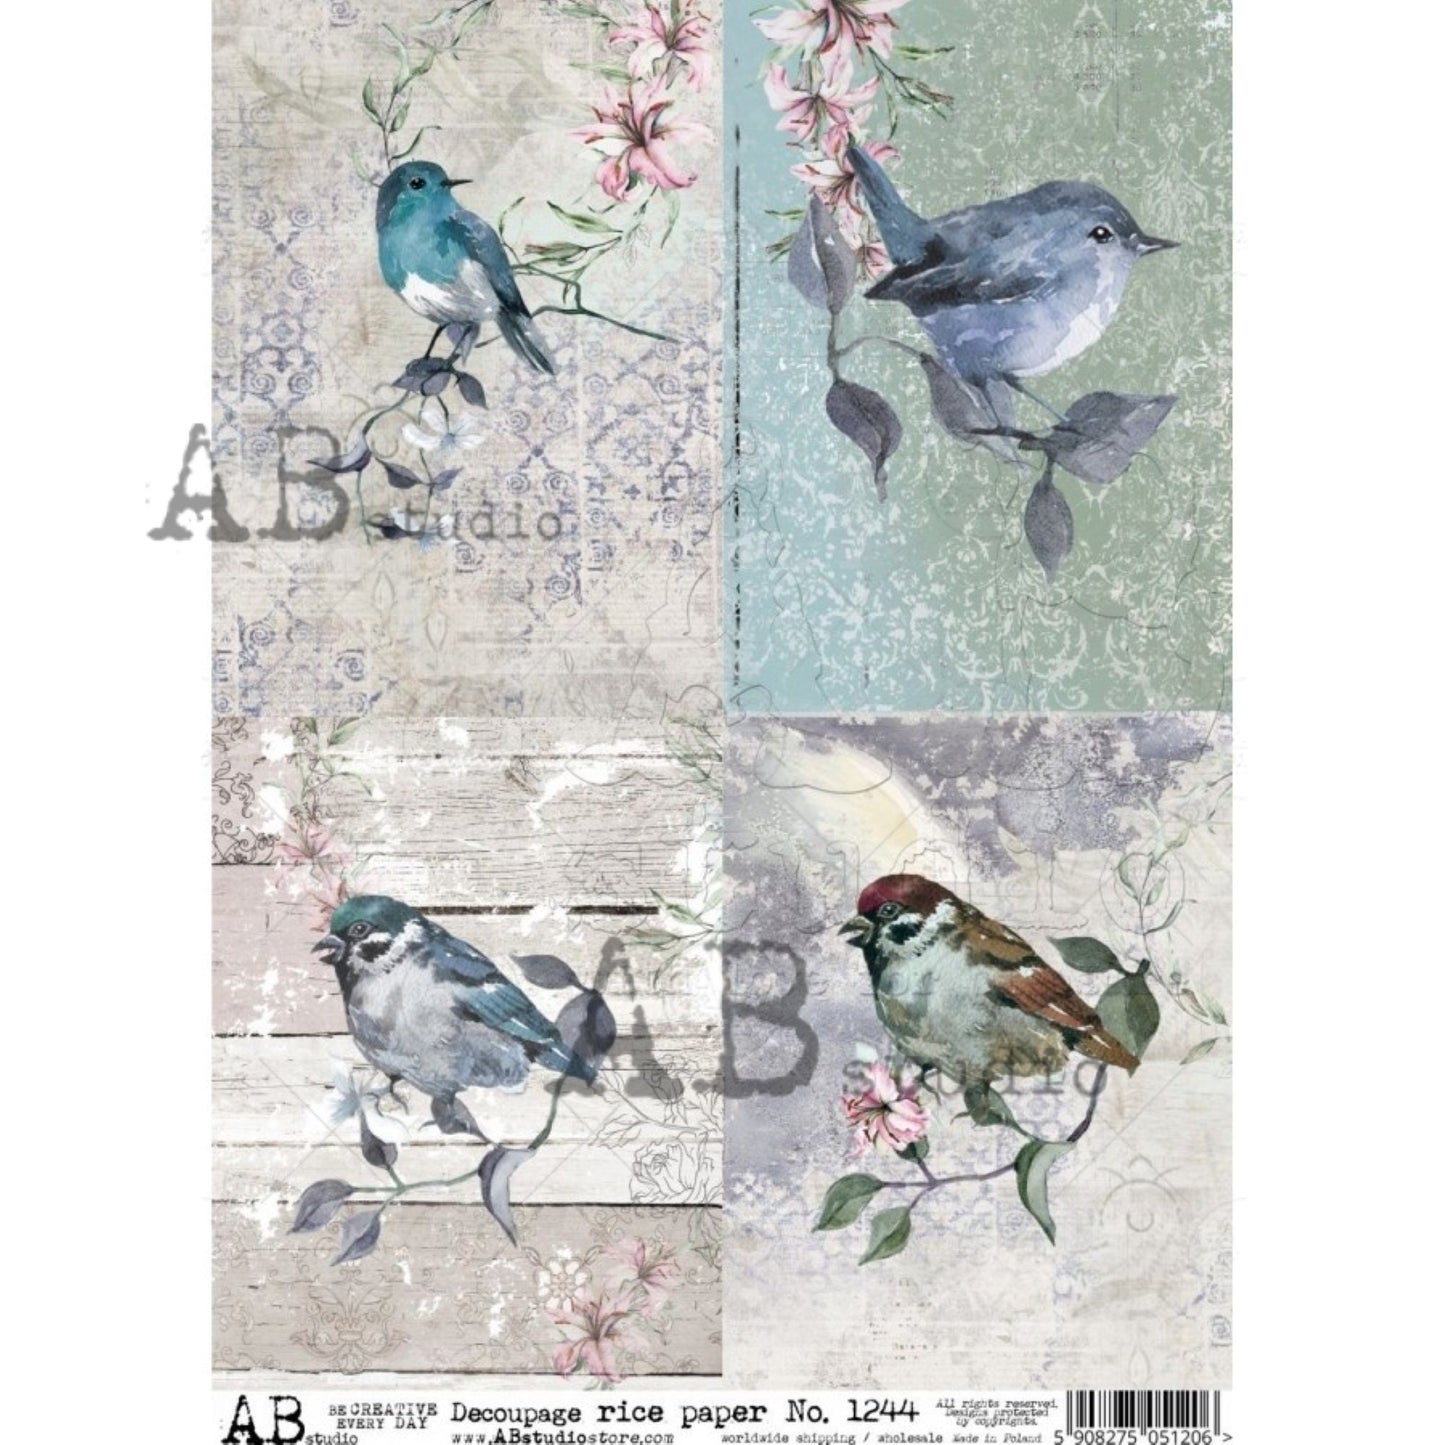 AB Studio Shabby Chic,  Spring Blue Birds, Squares, 1244, Size: A4 - 8.27 X 11.69 inches Rice Paper Decoupage Imported Poland